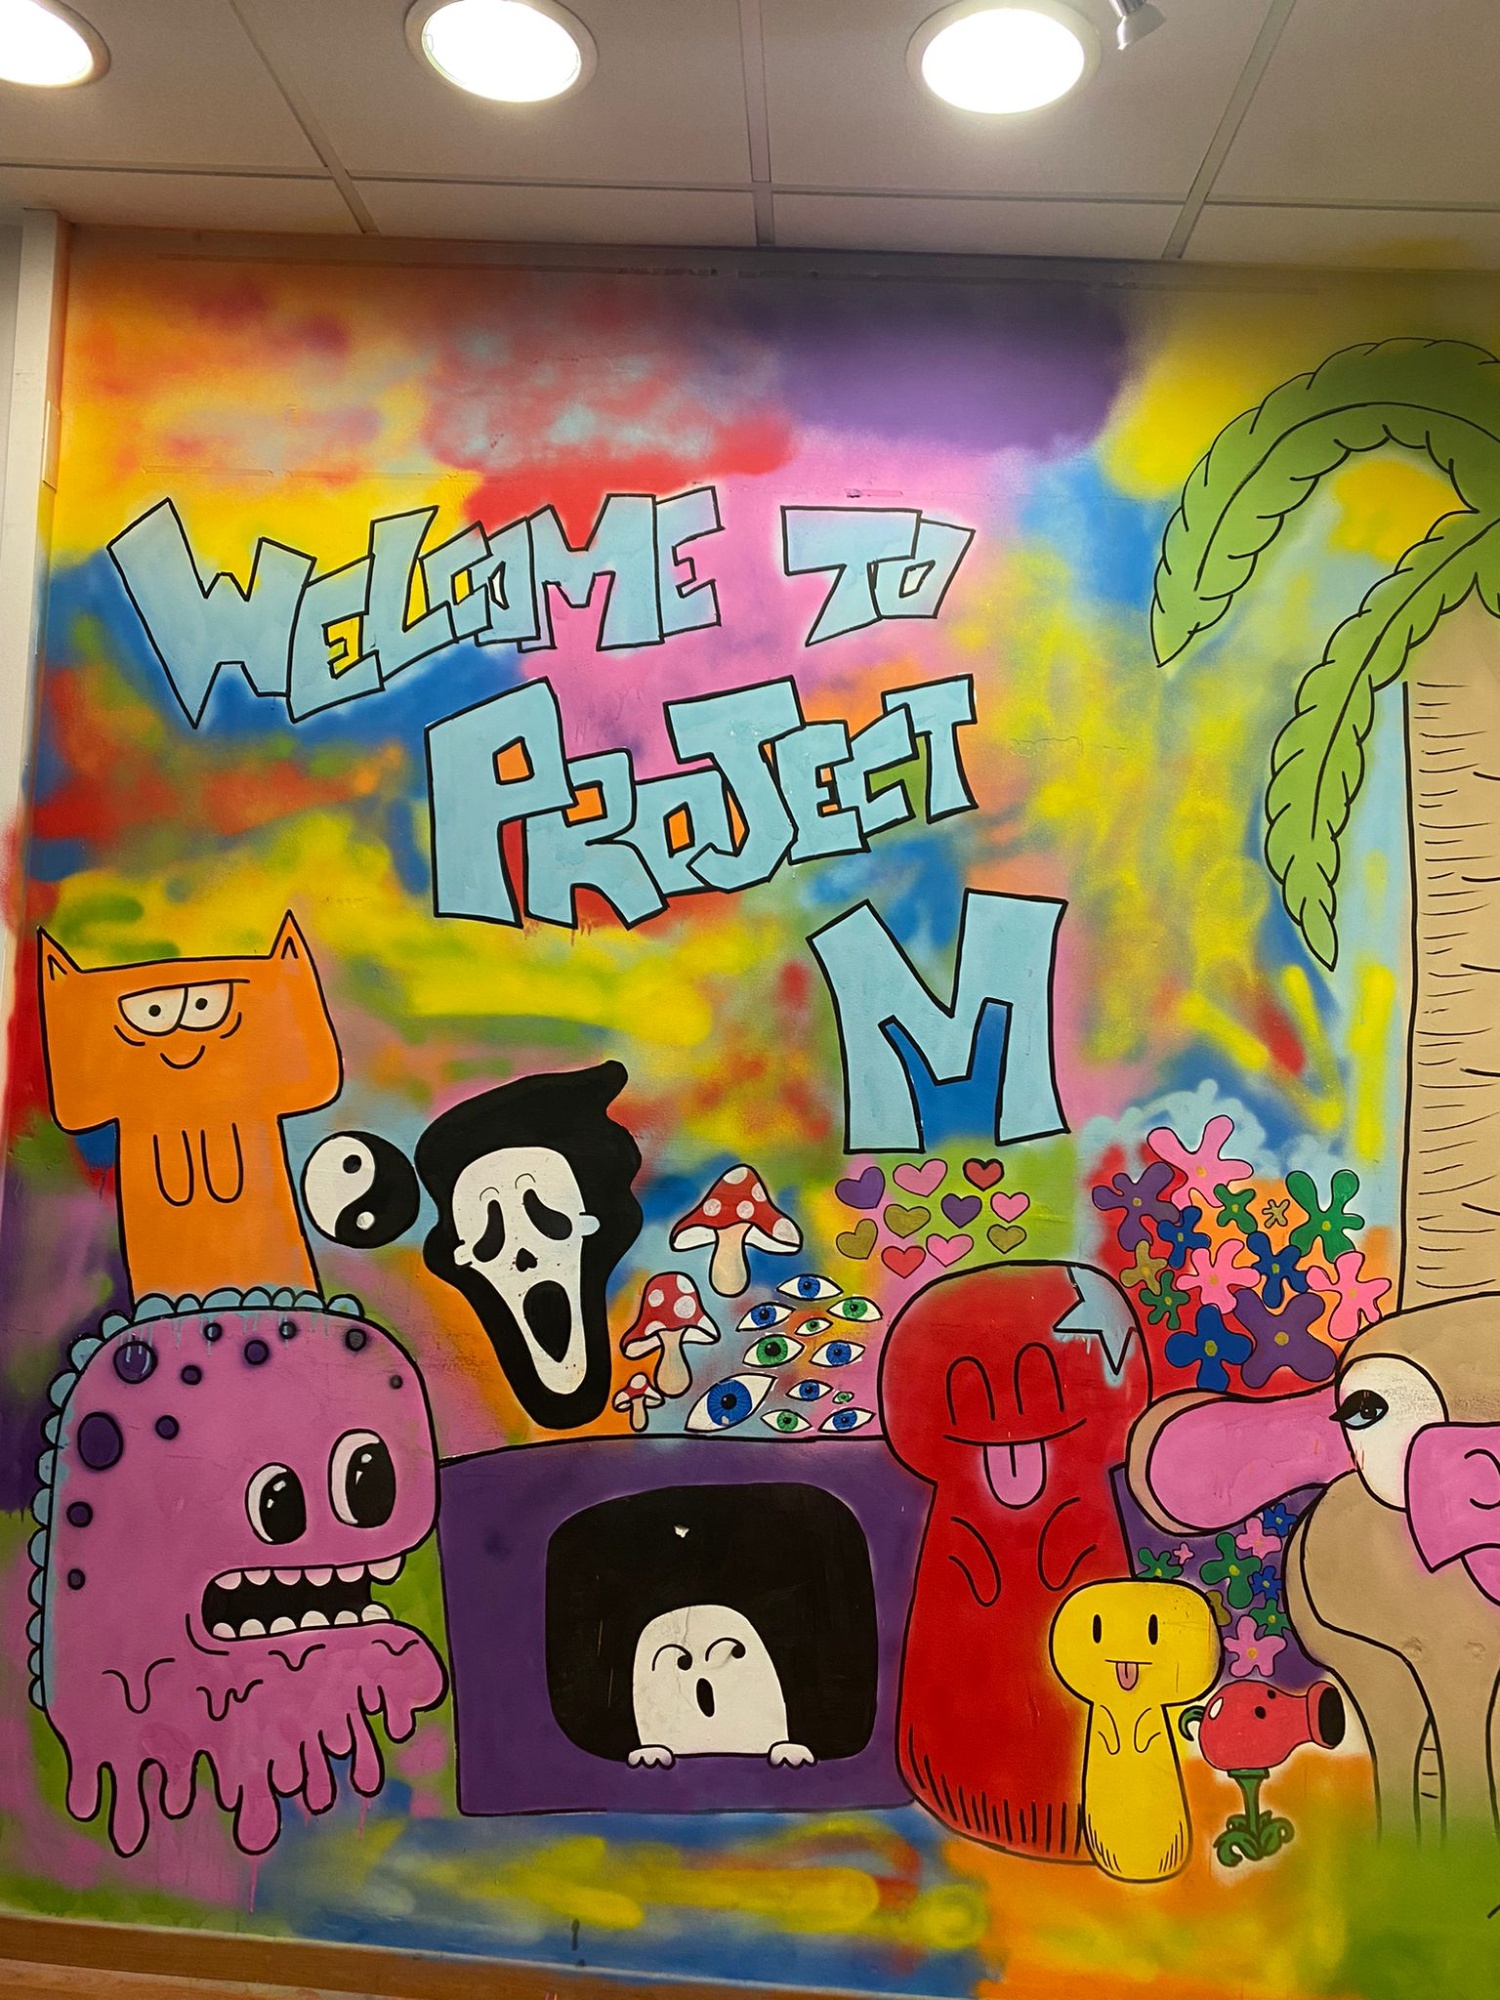 A graffiti-style mural at the entrance to Project M